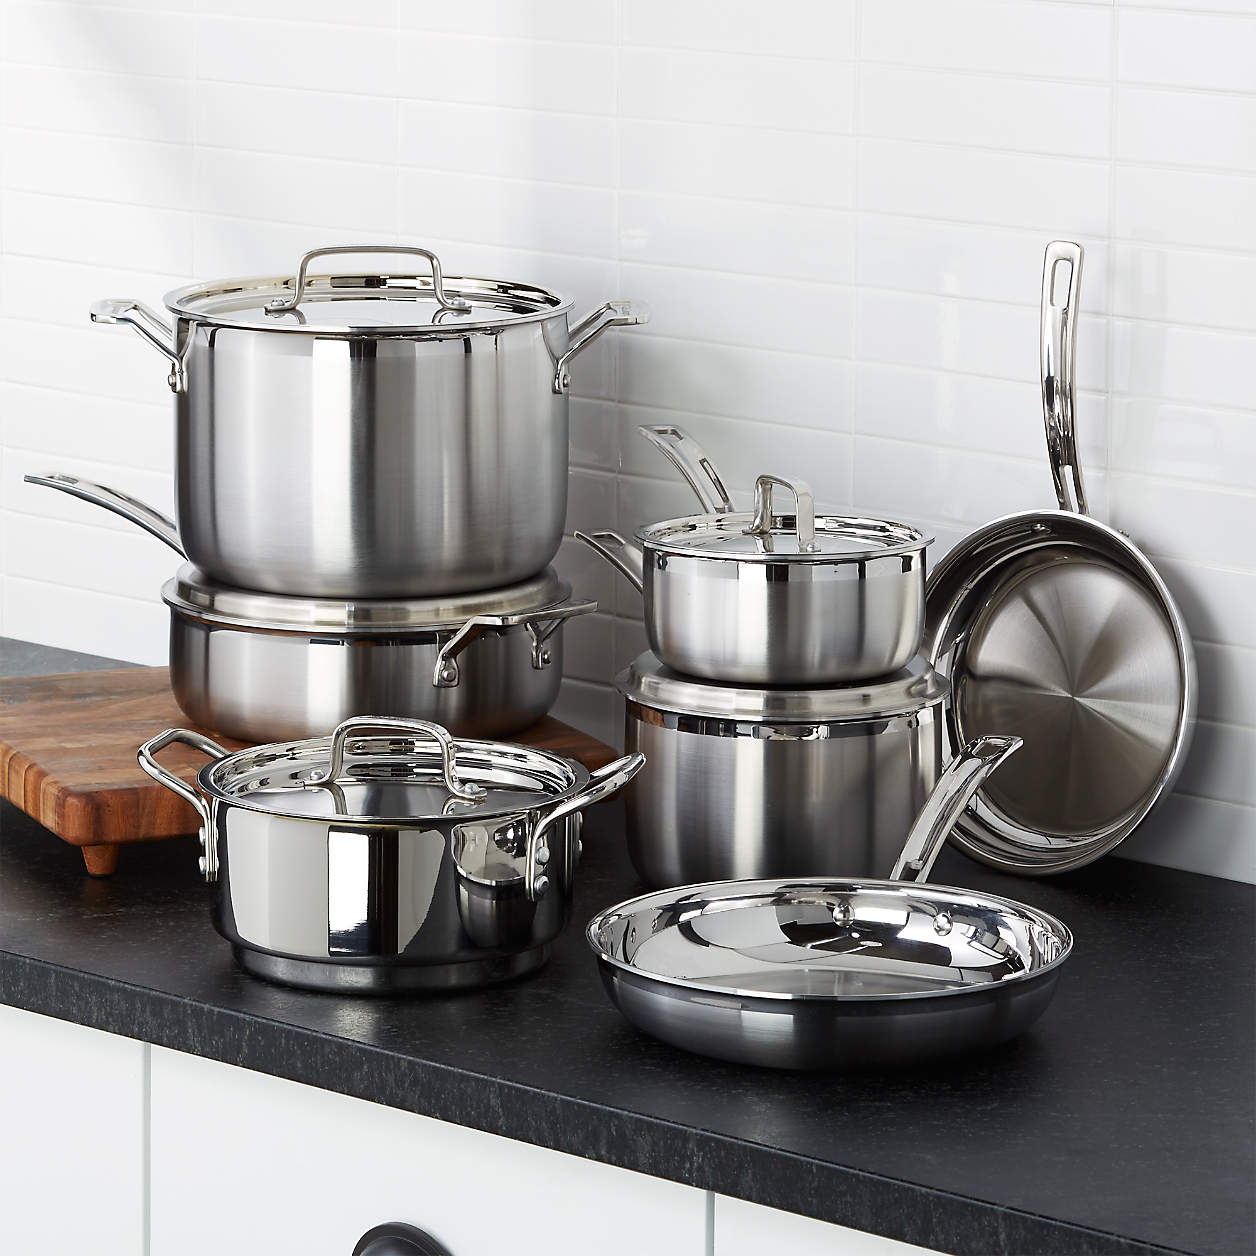 Cuisinart MultiClad Pro Tri-Ply Stainless Steel 12-piece Cookware Set Cuisinart Multiclad Pro Tri-ply Stainless Steel 12 Piece Cookware Set